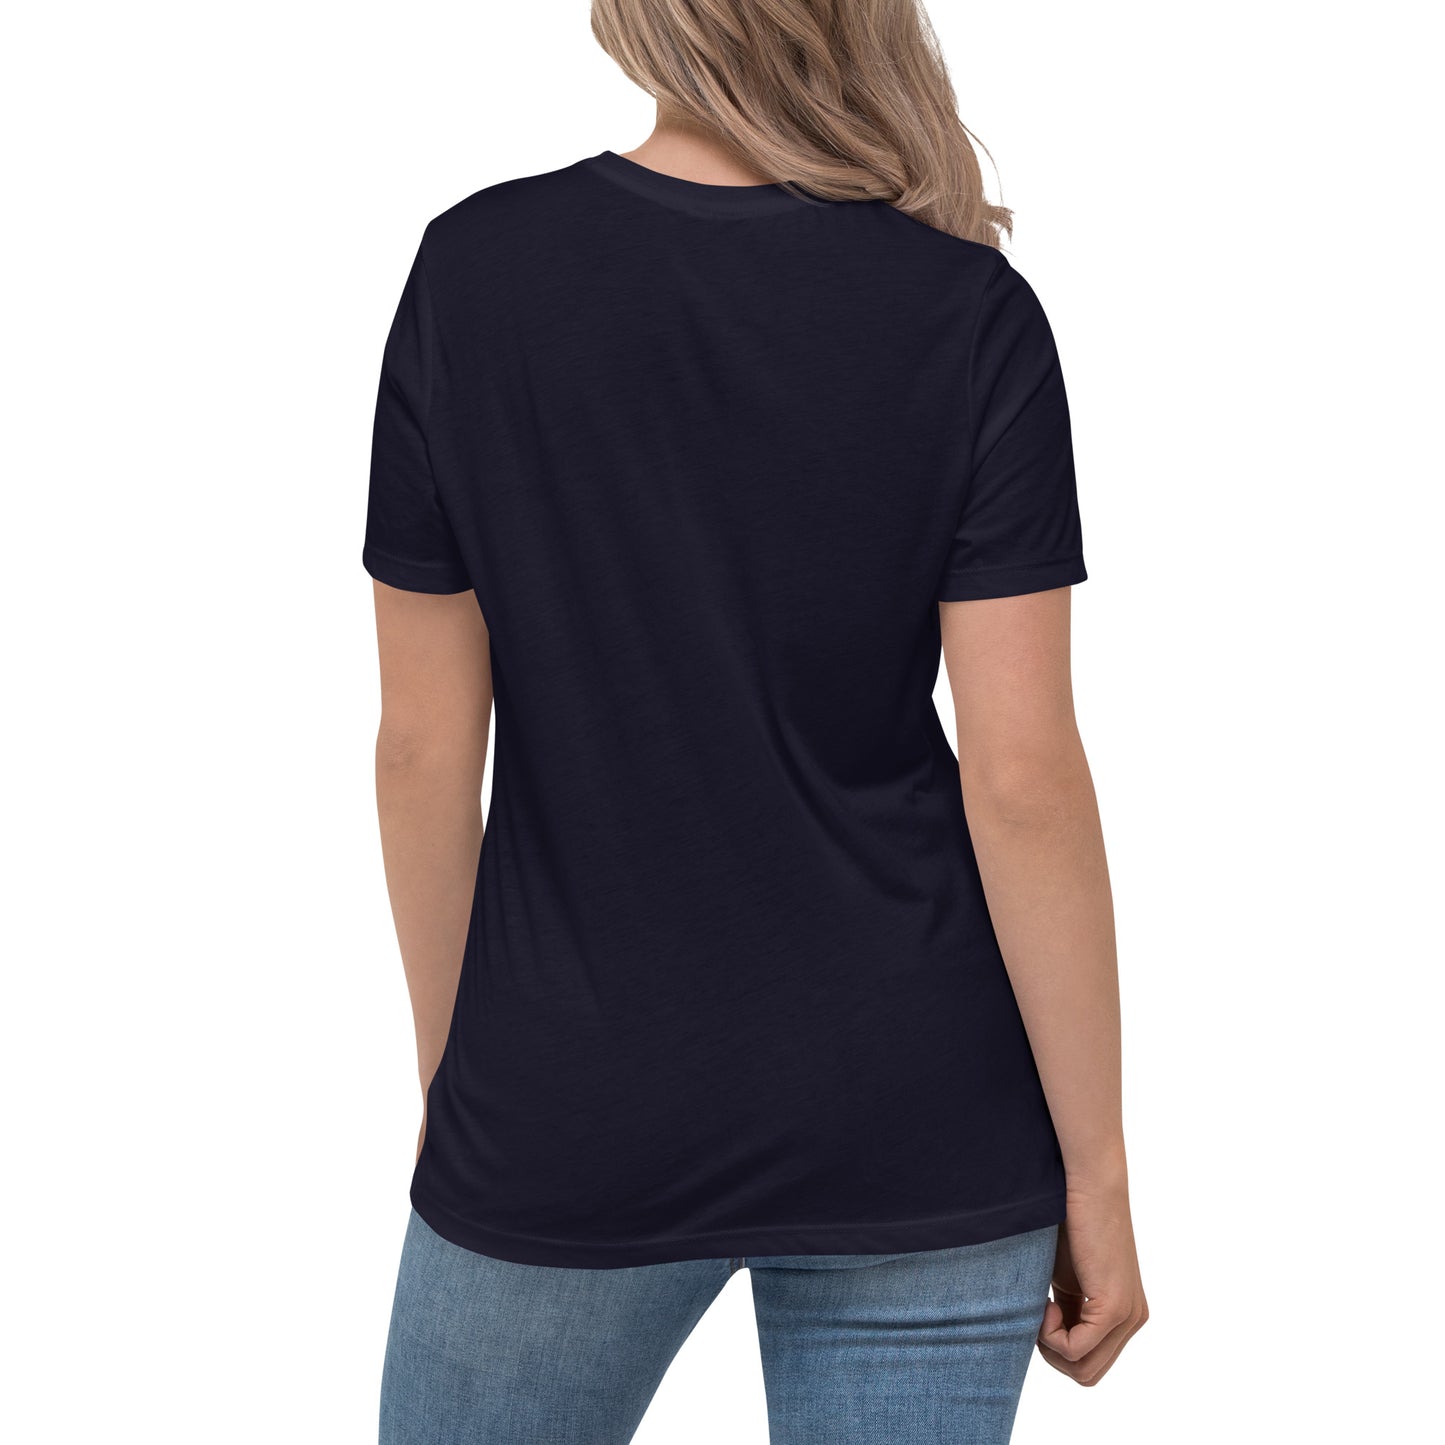 IN THE WEEDS 1 BLACK Women's Relaxed T-Shirt